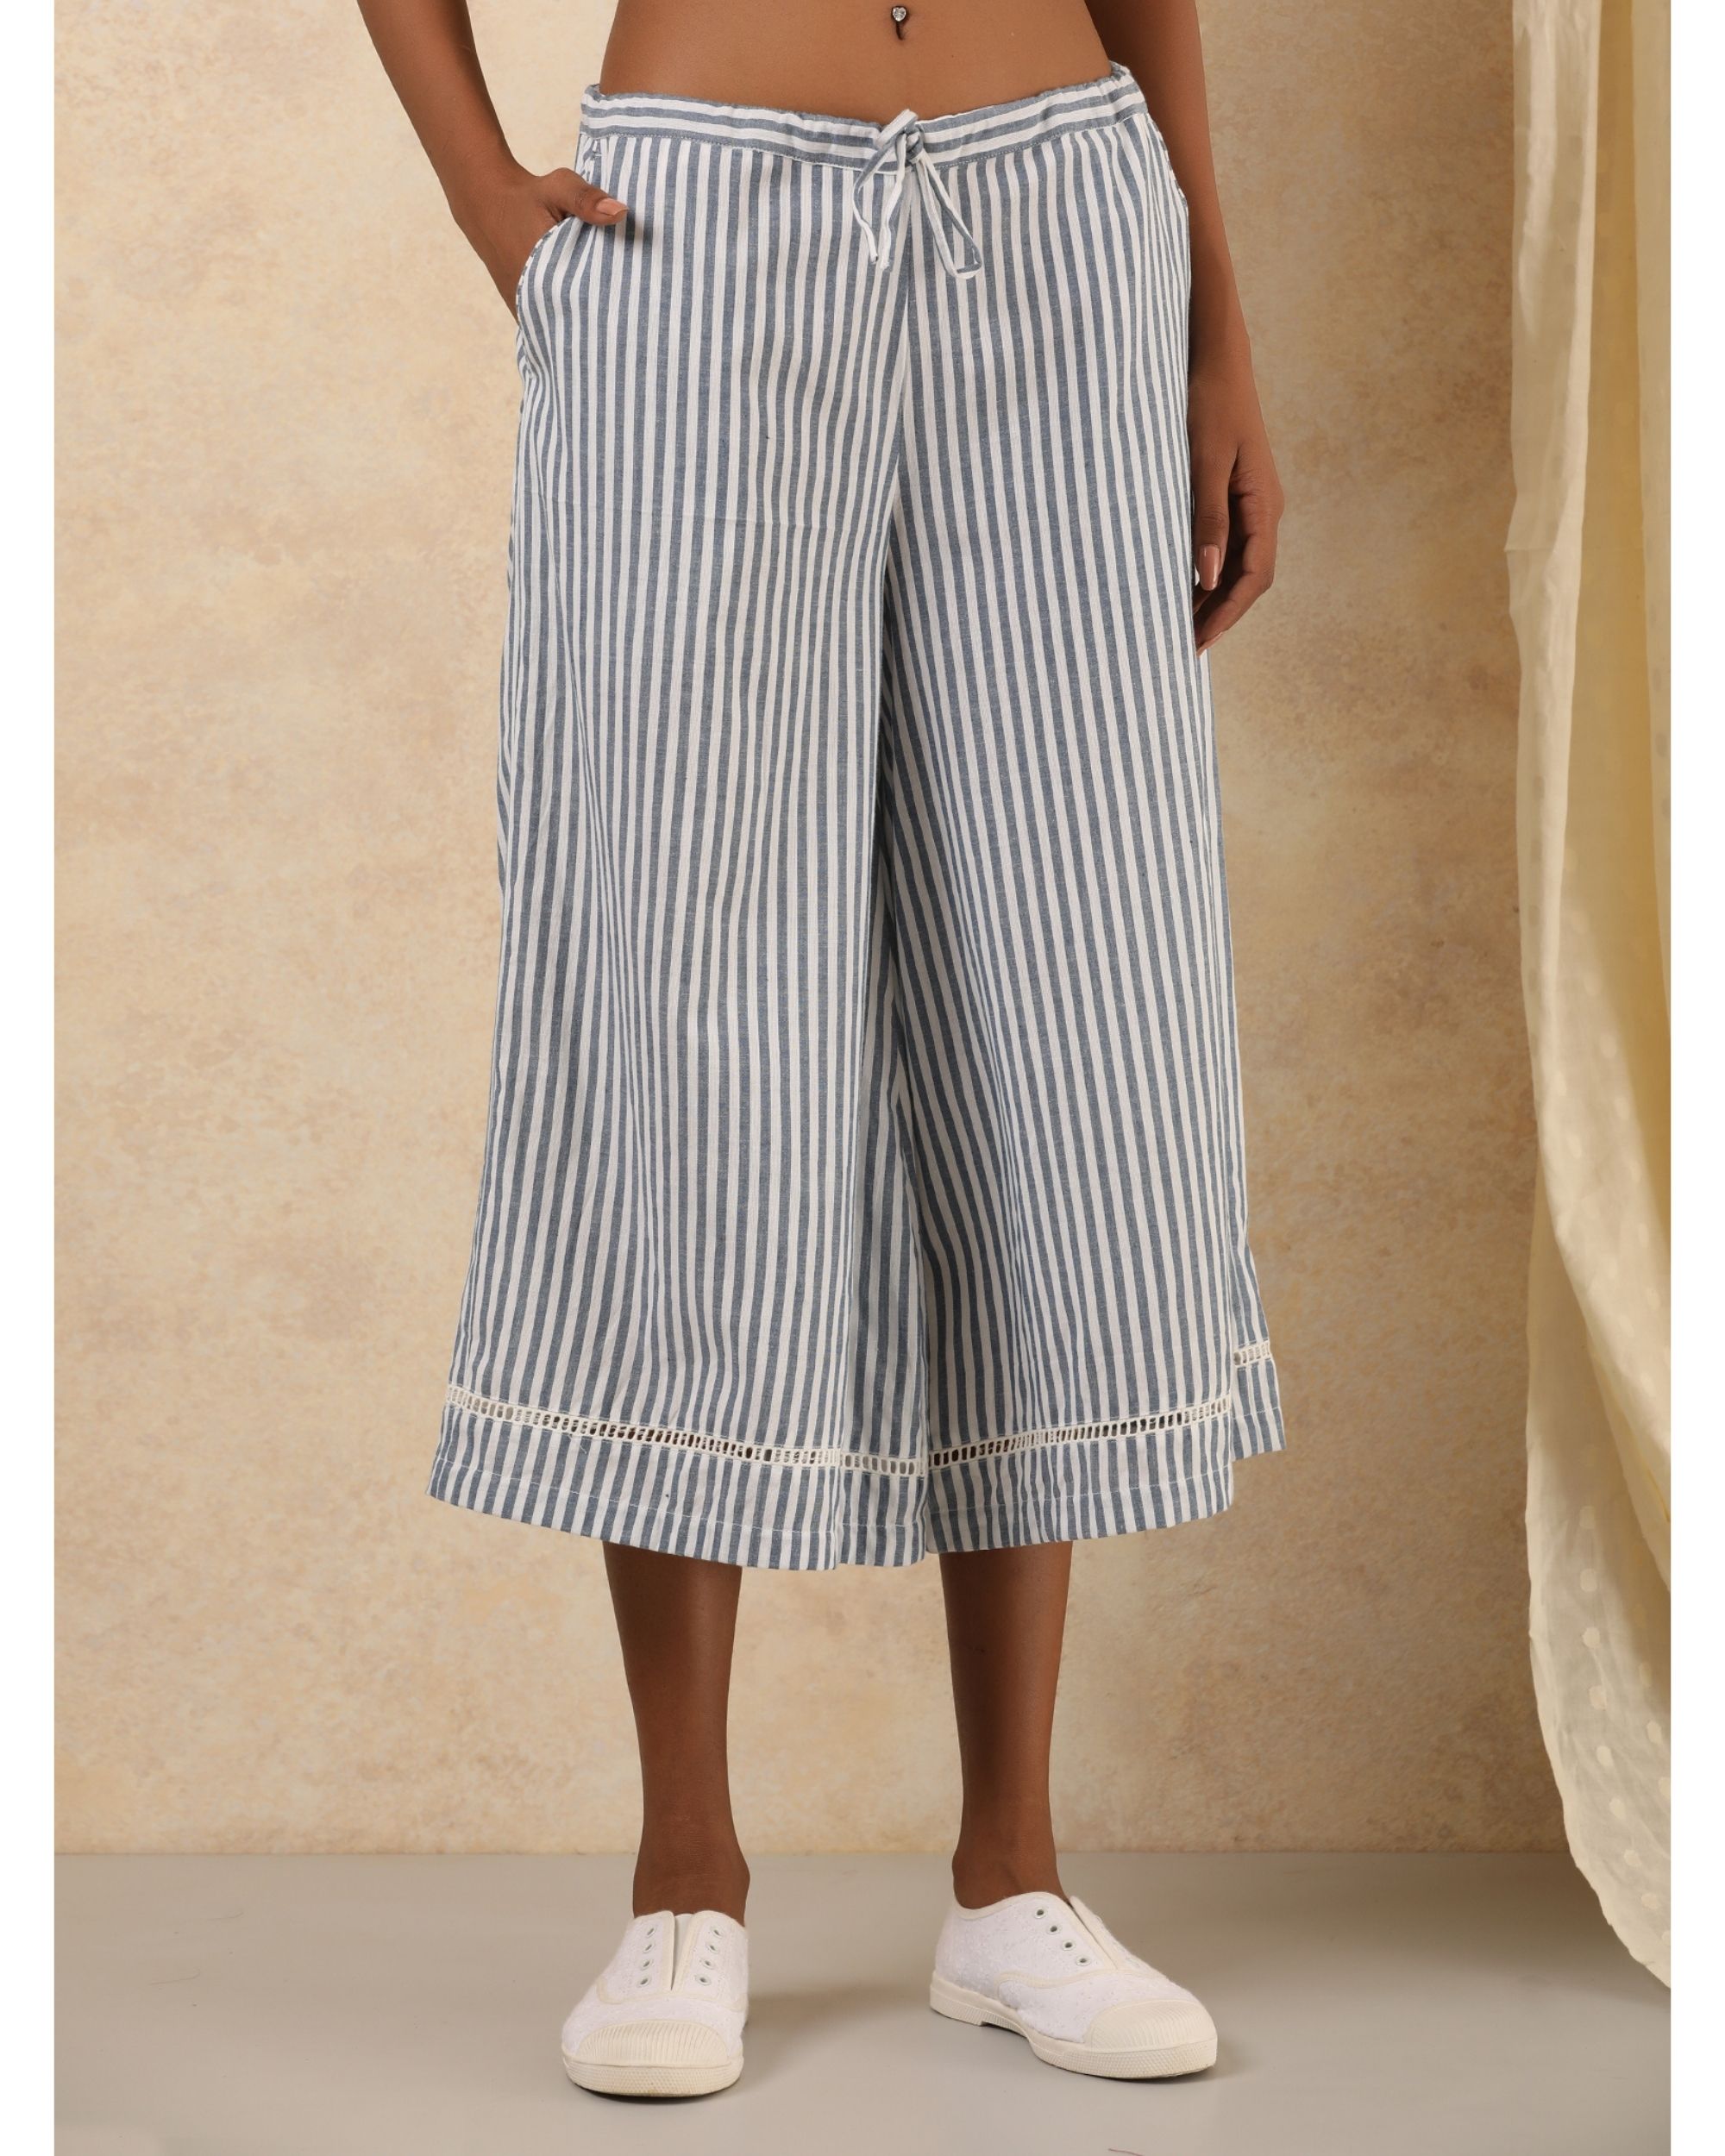 Blue and white pinstripe cotton pants